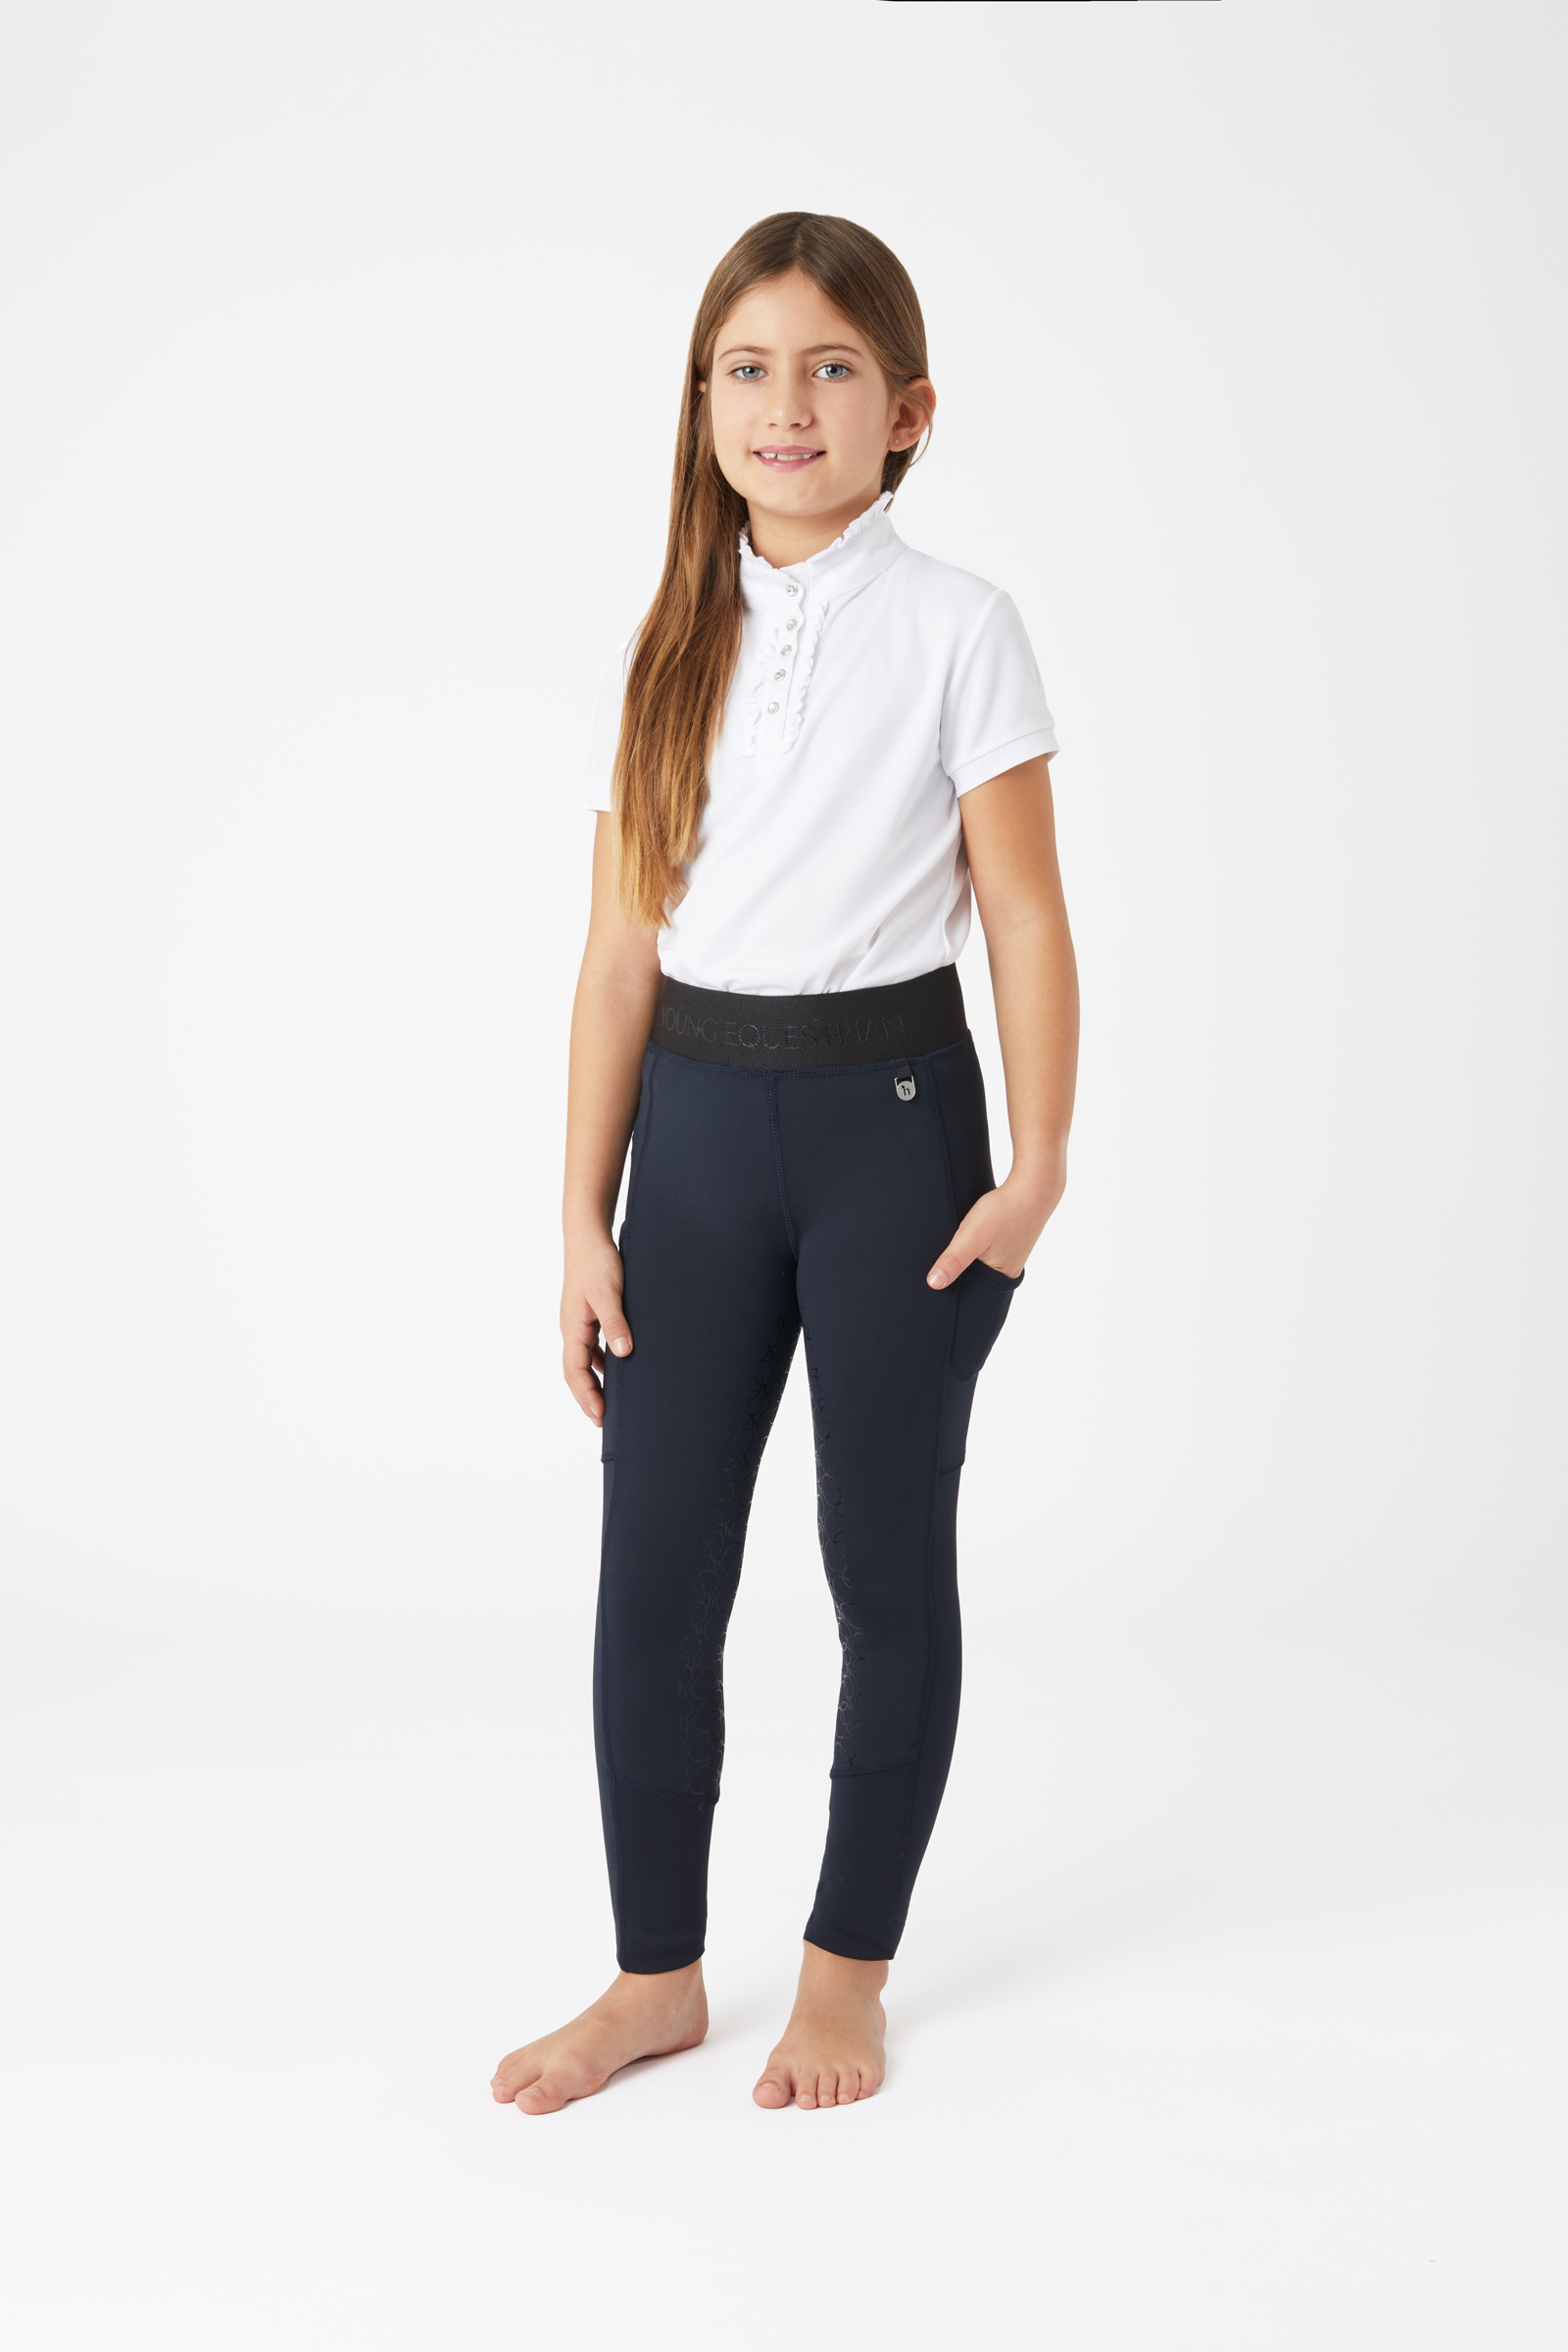 Youth Thermal Contrast Riding Tights - excelequine